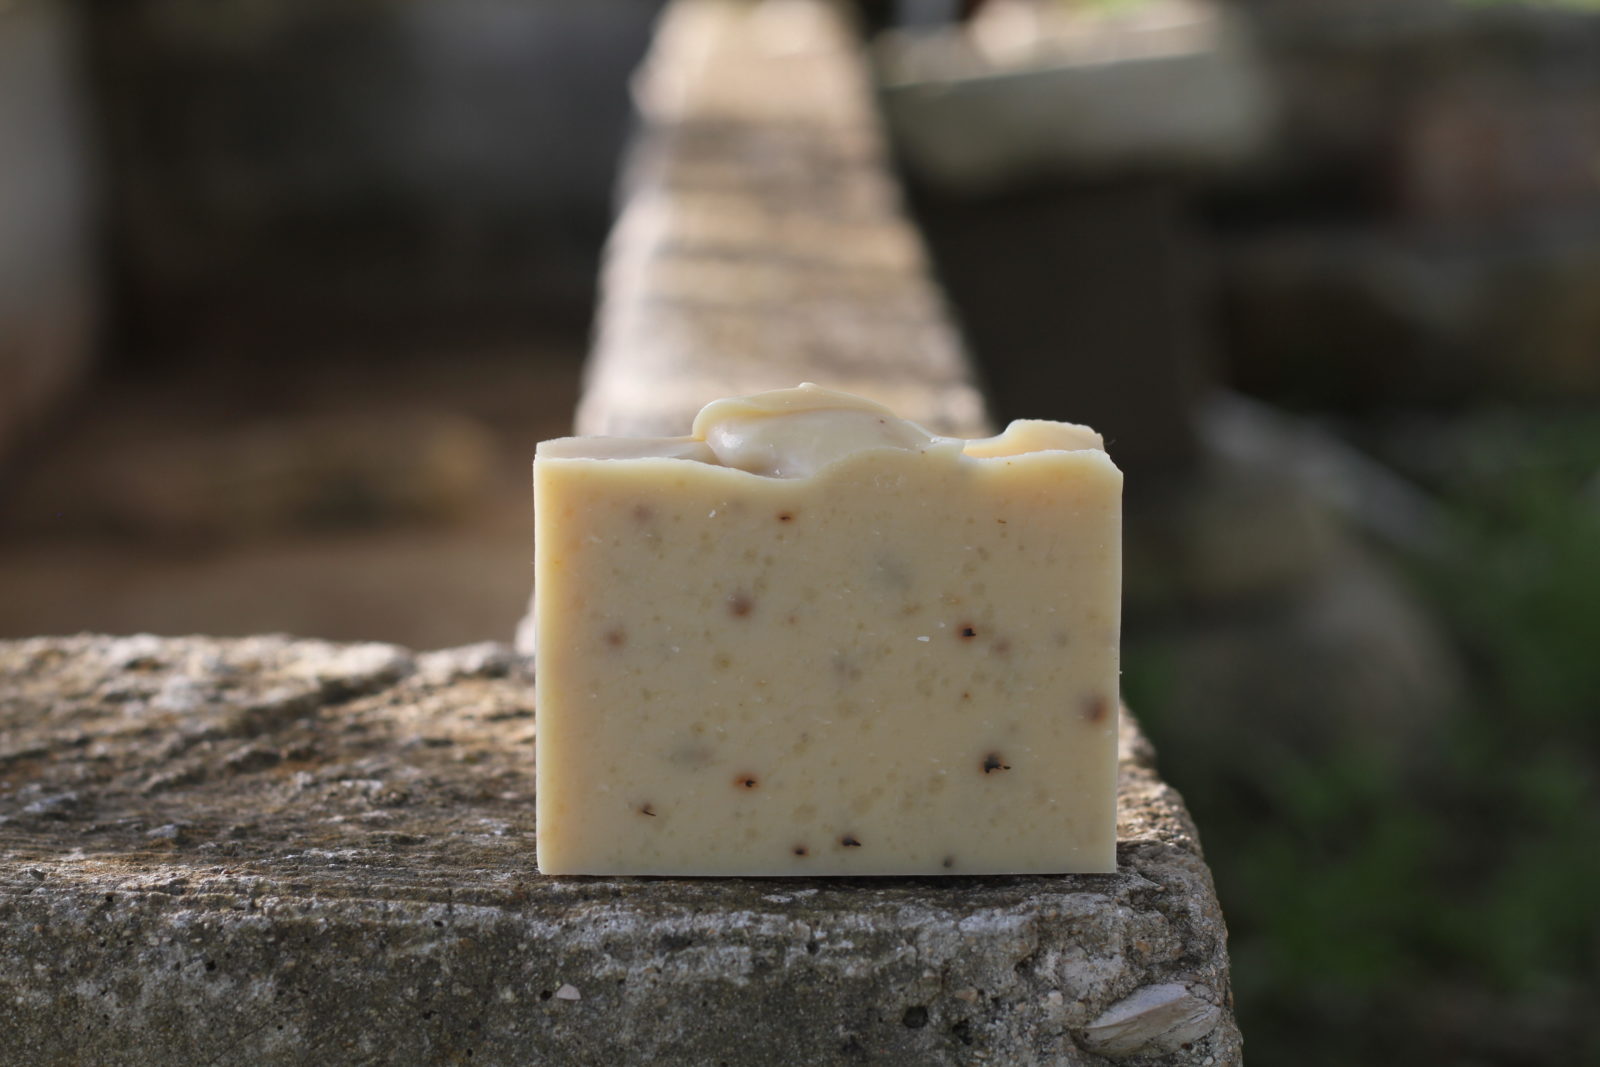 Herb & Soil Shampoo Bar is the perfect blend of patchouli, tobacco, and juniper in our goats milk soap recipe.